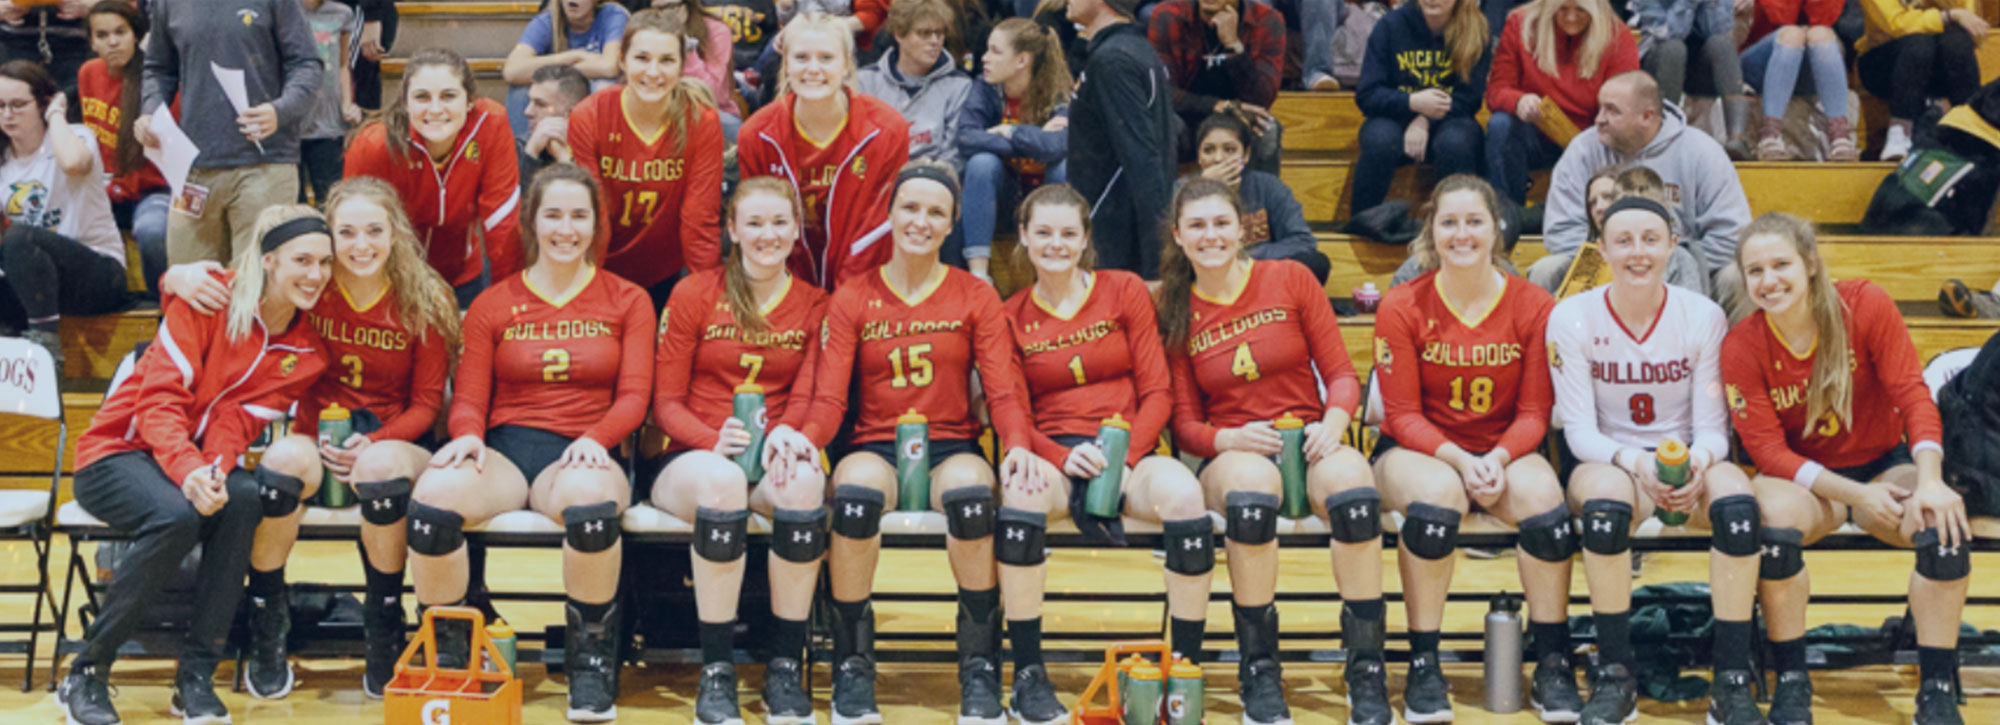 Ferris State Moves Up to No. 6 in Latest AVCA Volleyball Poll